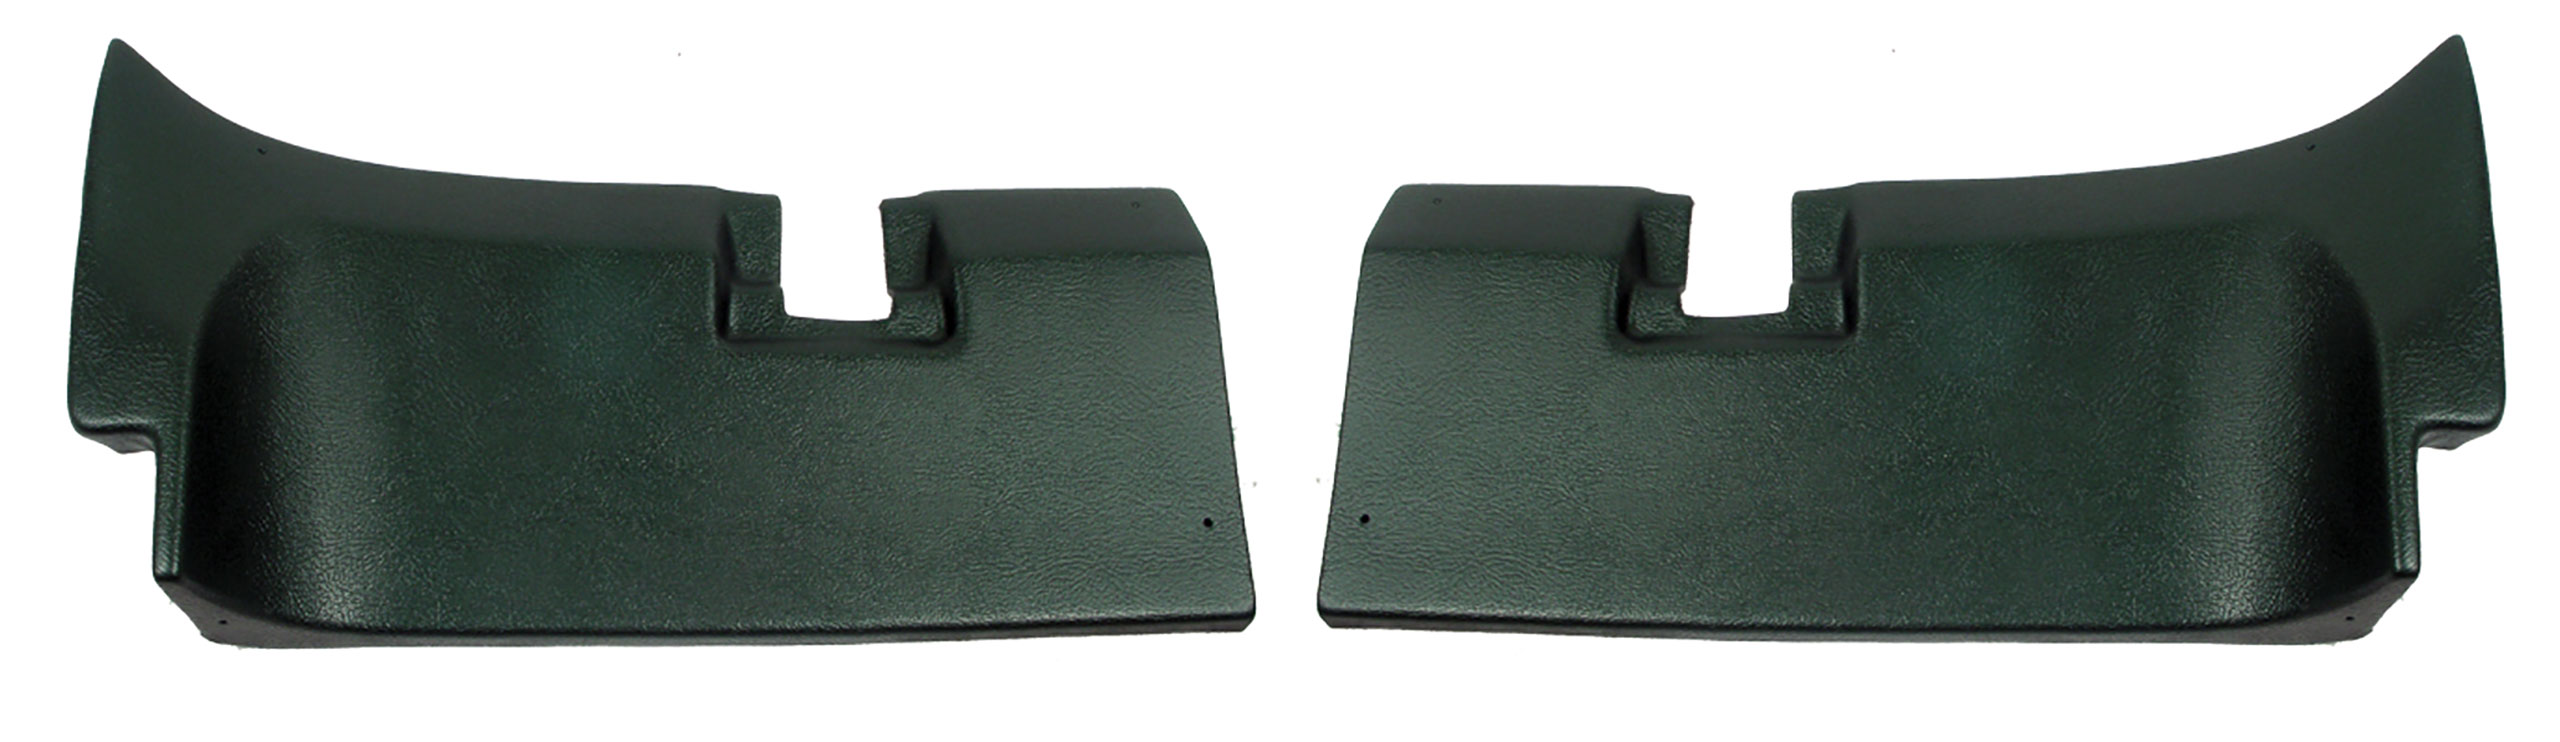 Rear Coupe Roof Panels- Green For 1970 Corvette